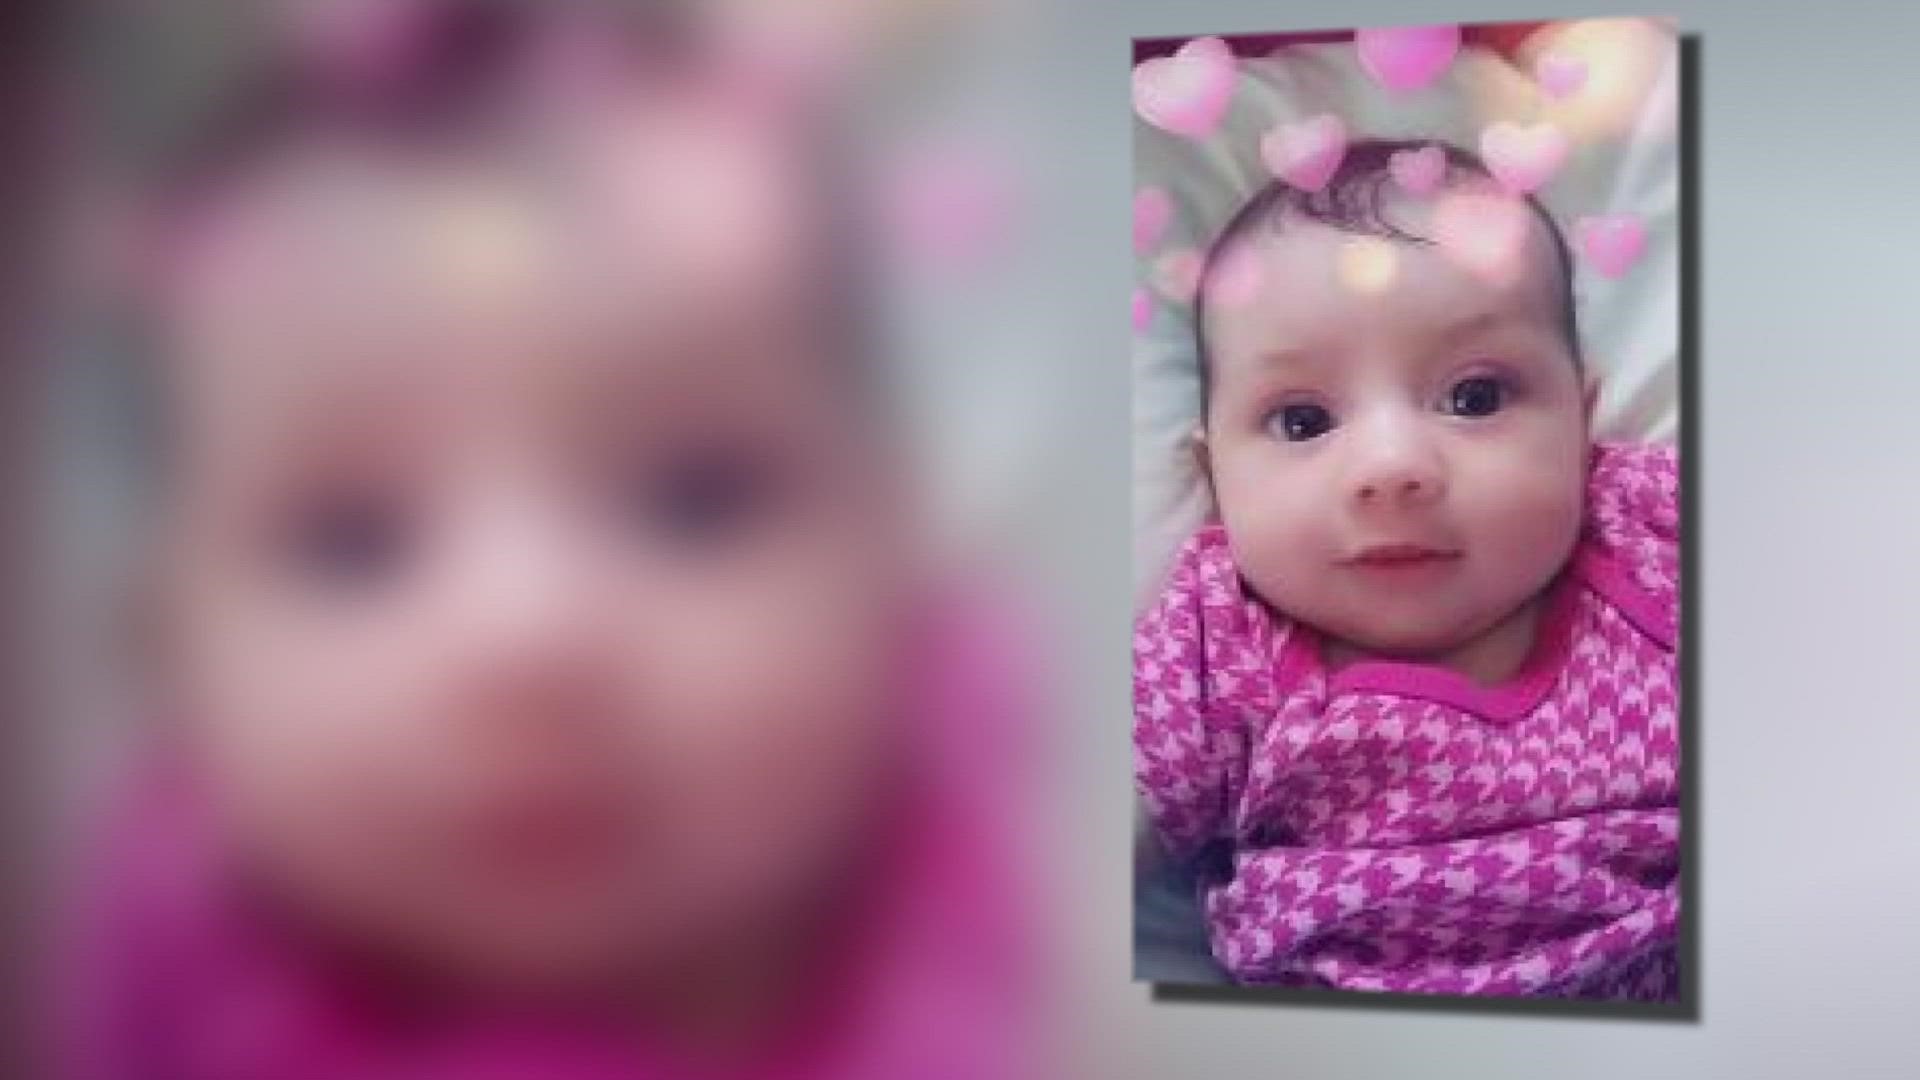 Amiah was last seen in 2019, and police ruled the case a homicide.